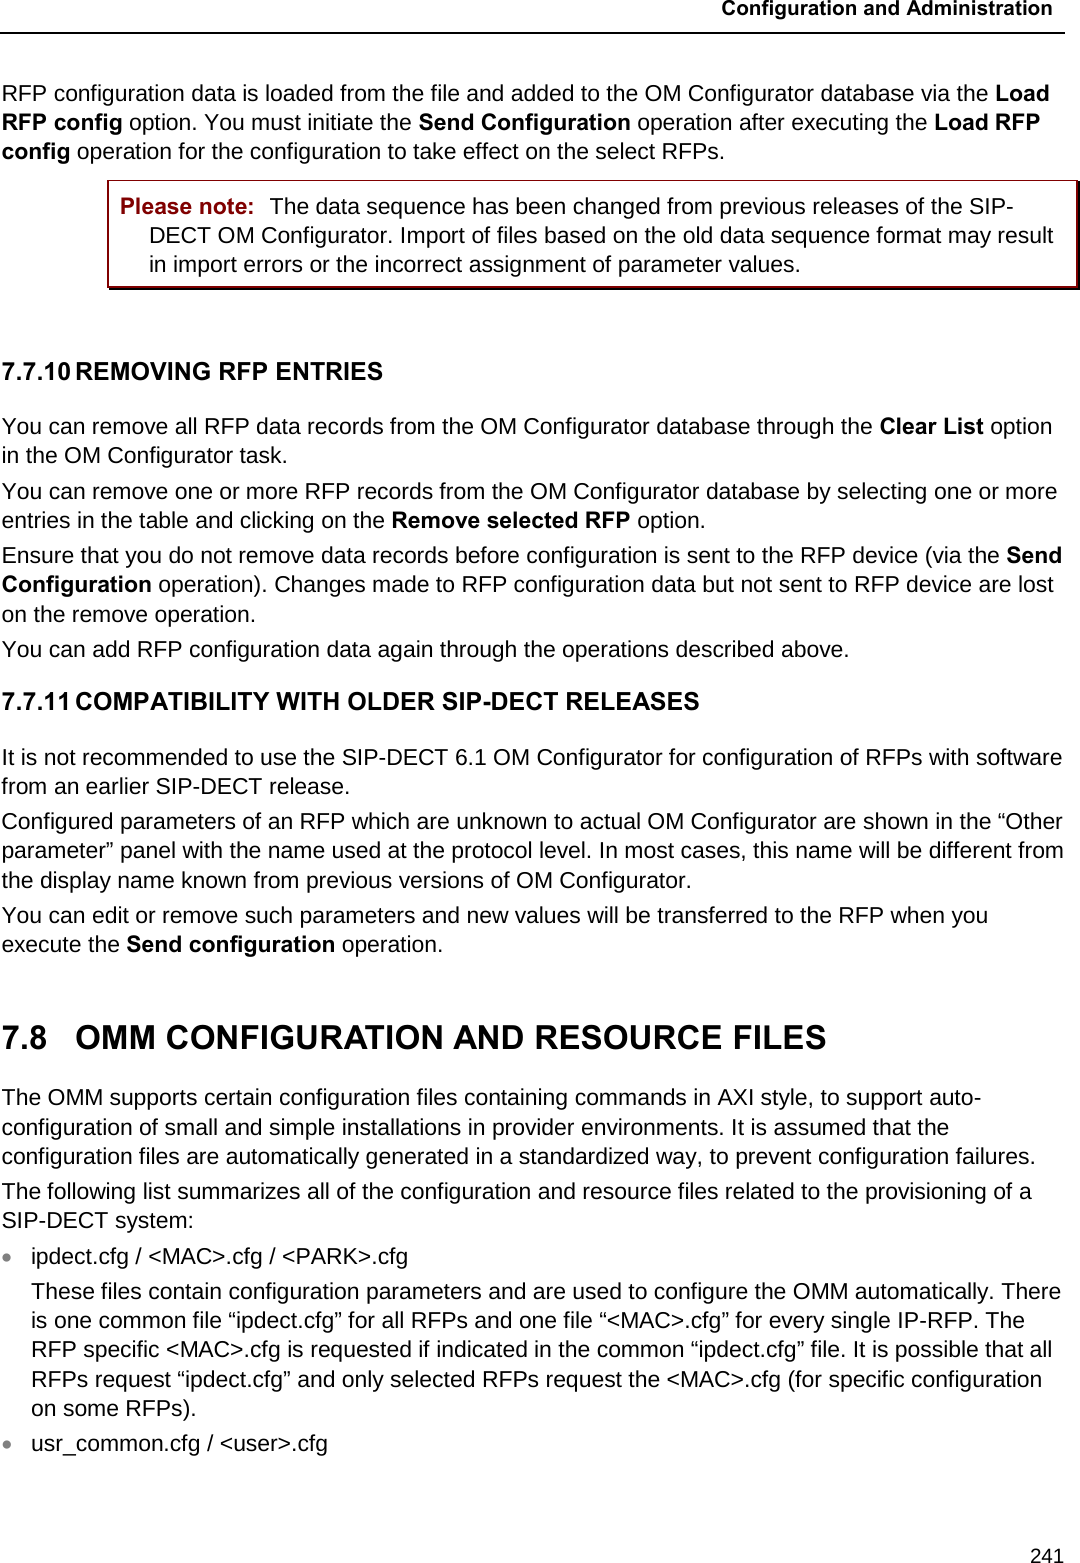  Configuration and Administration  241 RFP configuration data is loaded from the file and added to the OM Configurator database via the Load RFP config option. You must initiate the Send Configuration operation after executing the Load RFP config operation for the configuration to take effect on the select RFPs. Please note: The data sequence has been changed from previous releases of the SIP-DECT OM Configurator. Import of files based on the old data sequence format may result in import errors or the incorrect assignment of parameter values.   7.7.10 REMOVING RFP ENTRIES You can remove all RFP data records from the OM Configurator database through the Clear List option in the OM Configurator task.  You can remove one or more RFP records from the OM Configurator database by selecting one or more entries in the table and clicking on the Remove selected RFP option. Ensure that you do not remove data records before configuration is sent to the RFP device (via the Send Configuration operation). Changes made to RFP configuration data but not sent to RFP device are lost on the remove operation. You can add RFP configuration data again through the operations described above. 7.7.11 COMPATIBILITY WITH OLDER SIP-DECT RELEASES It is not recommended to use the SIP-DECT 6.1 OM Configurator for configuration of RFPs with software from an earlier SIP-DECT release. Configured parameters of an RFP which are unknown to actual OM Configurator are shown in the “Other parameter” panel with the name used at the protocol level. In most cases, this name will be different from the display name known from previous versions of OM Configurator. You can edit or remove such parameters and new values will be transferred to the RFP when you execute the Send configuration operation.   7.8  OMM CONFIGURATION AND RESOURCE FILES The OMM supports certain configuration files containing commands in AXI style, to support auto-configuration of small and simple installations in provider environments. It is assumed that the configuration files are automatically generated in a standardized way, to prevent configuration failures. The following list summarizes all of the configuration and resource files related to the provisioning of a SIP-DECT system: • ipdect.cfg / &lt;MAC&gt;.cfg / &lt;PARK&gt;.cfg  These files contain configuration parameters and are used to configure the OMM automatically. There is one common file “ipdect.cfg” for all RFPs and one file “&lt;MAC&gt;.cfg” for every single IP-RFP. The RFP specific &lt;MAC&gt;.cfg is requested if indicated in the common “ipdect.cfg” file. It is possible that all RFPs request “ipdect.cfg” and only selected RFPs request the &lt;MAC&gt;.cfg (for specific configuration on some RFPs). • usr_common.cfg / &lt;user&gt;.cfg 